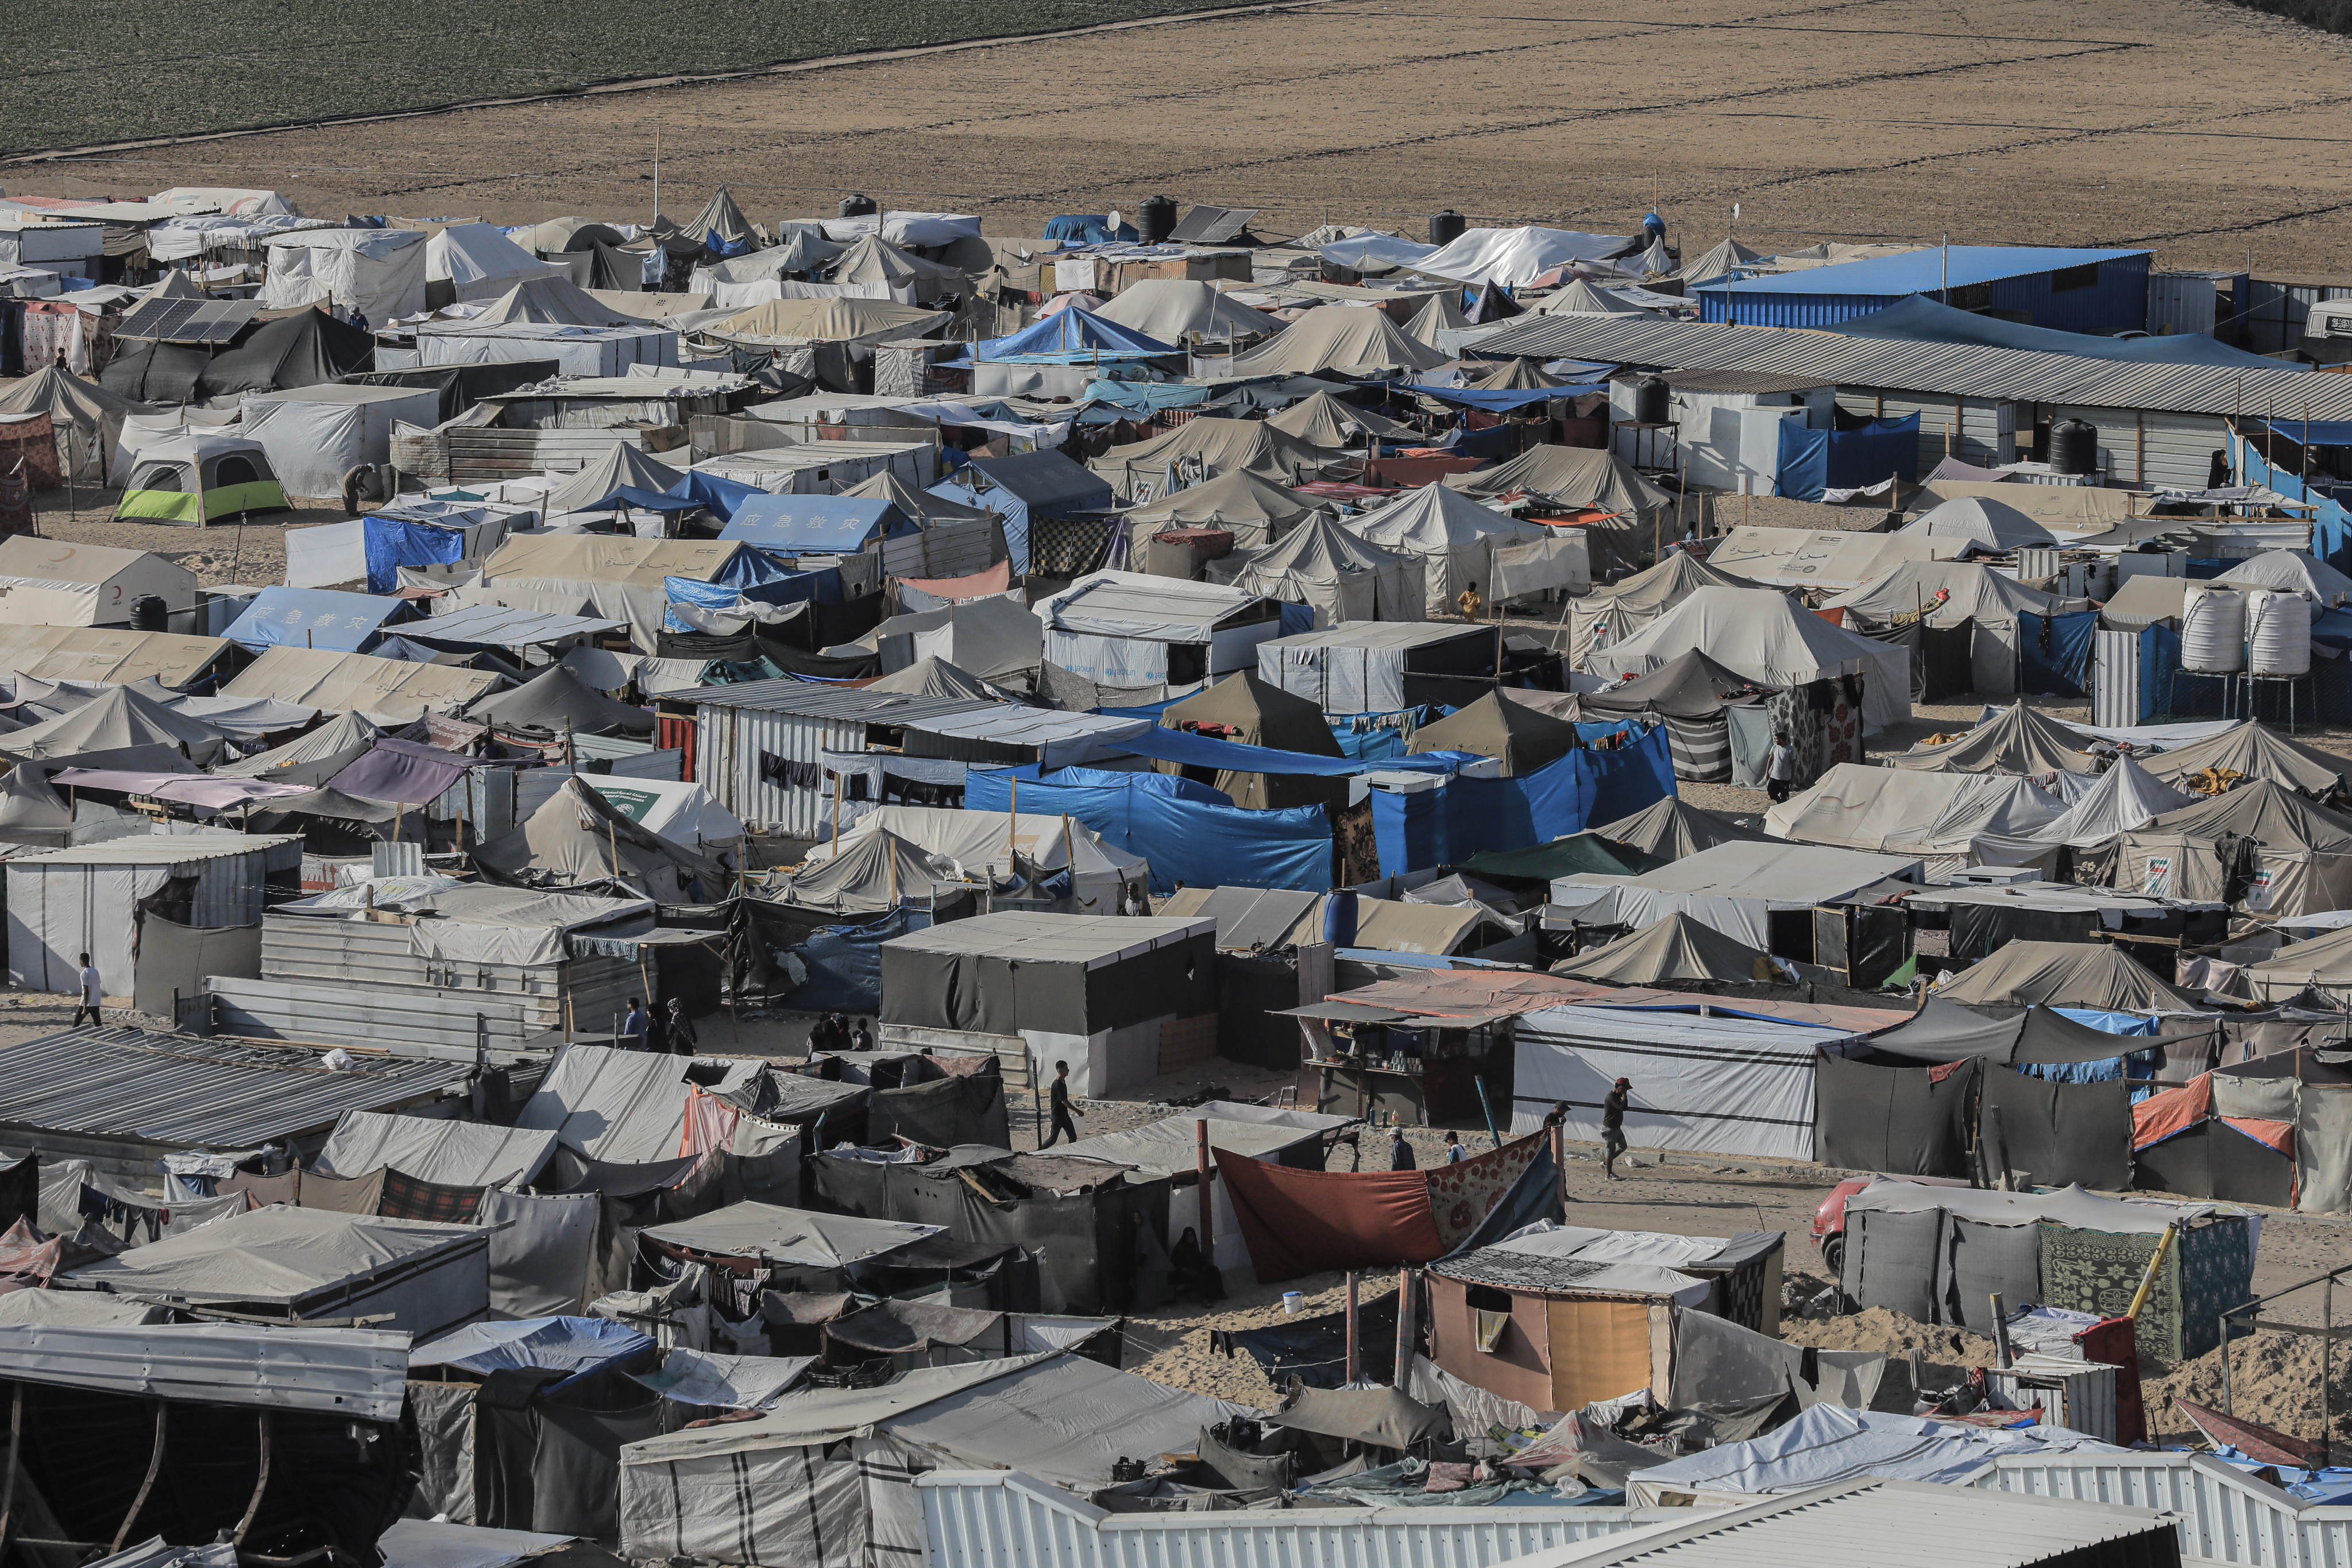 Tents for displaced Palestinians at al-Mawasi in the southern Gaza Strip city of Khan Younis. Photo: dpa